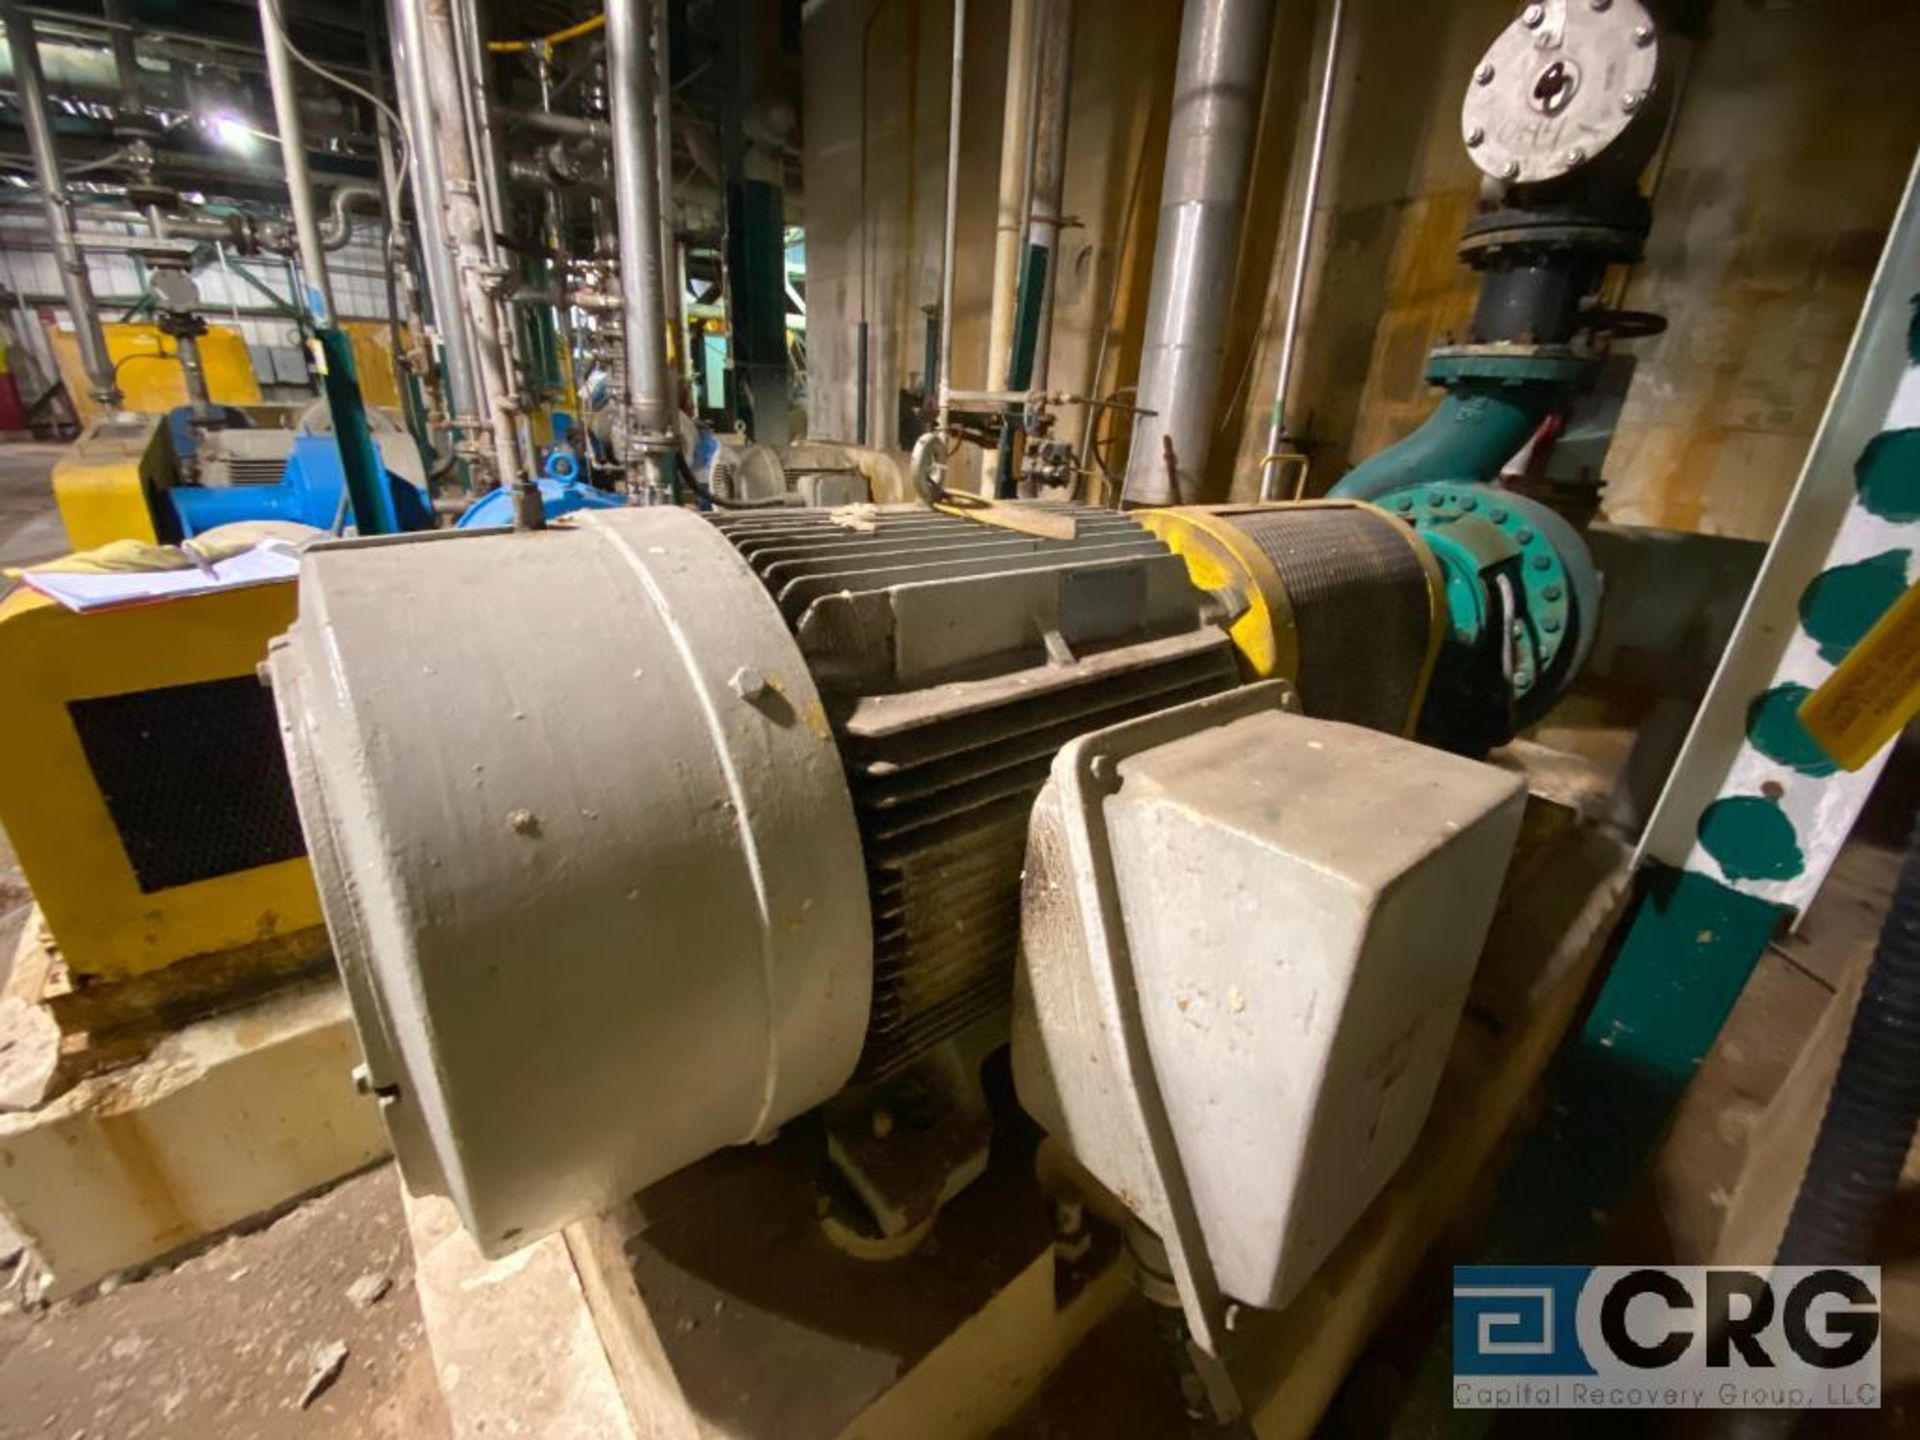 Summit XLO, Size 15 316 stainless steel centrifugal pump with 100 HP drive, (Location: Under PM-2) - Image 3 of 3